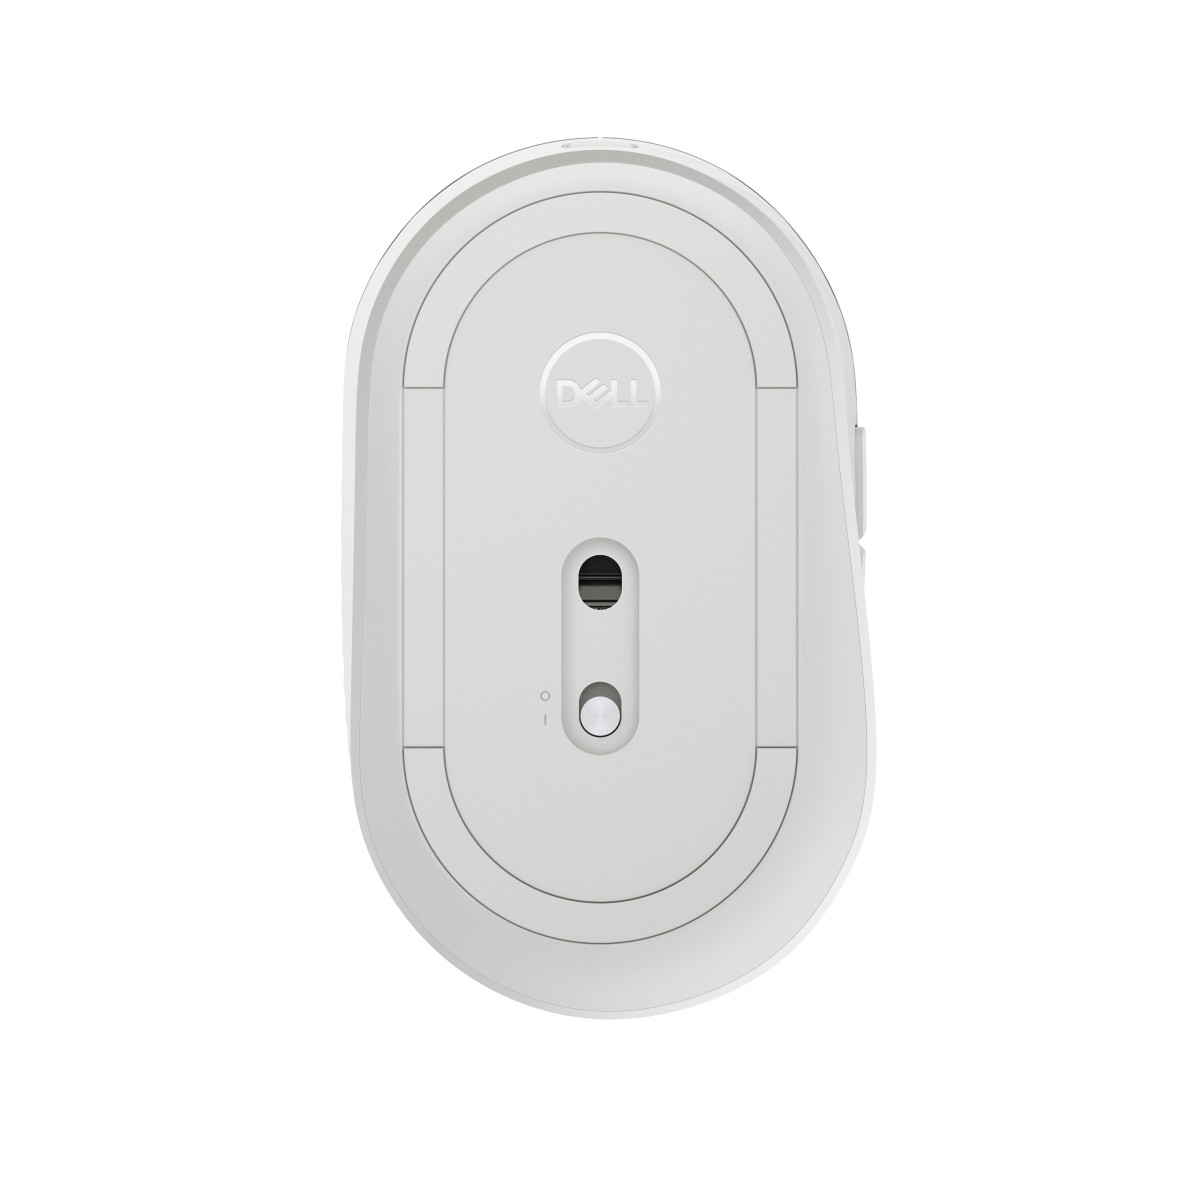 Prem Rechargeable Wireless Mouse-MS7421W